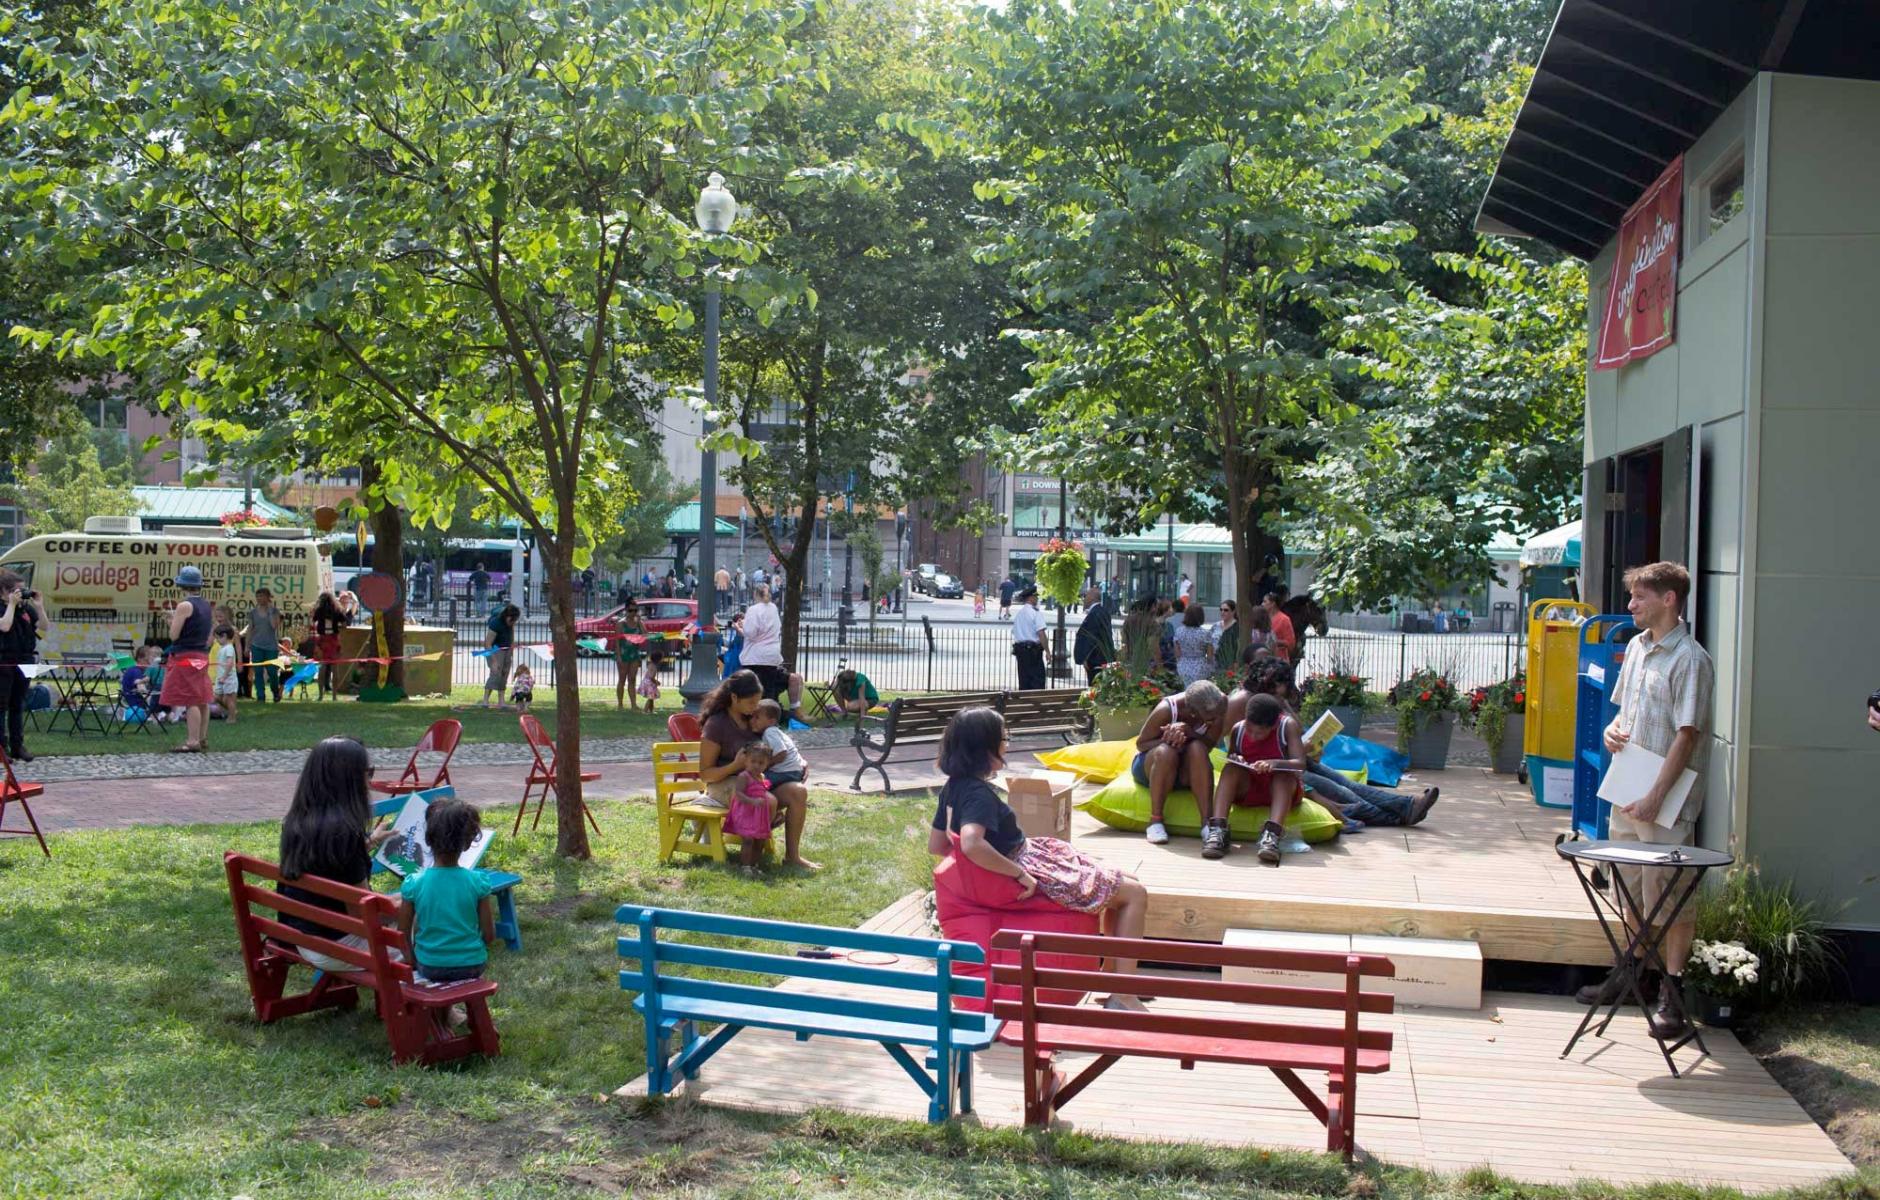 Placemaking and the Human Scale City